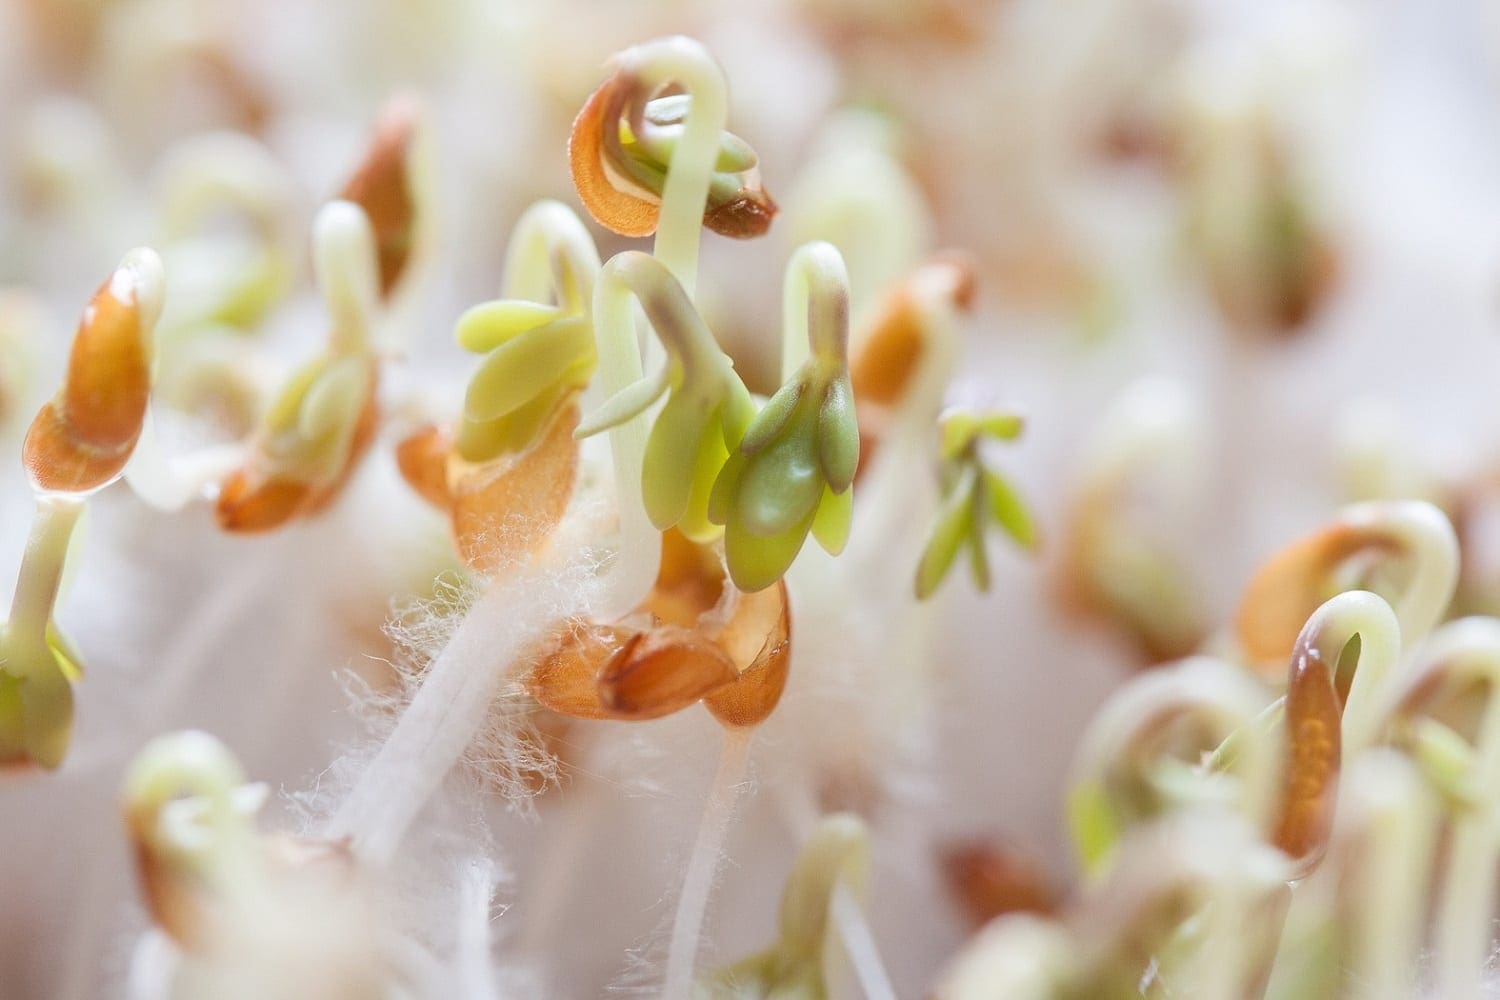 Cress seed sprouts, photo credit: Pxhere